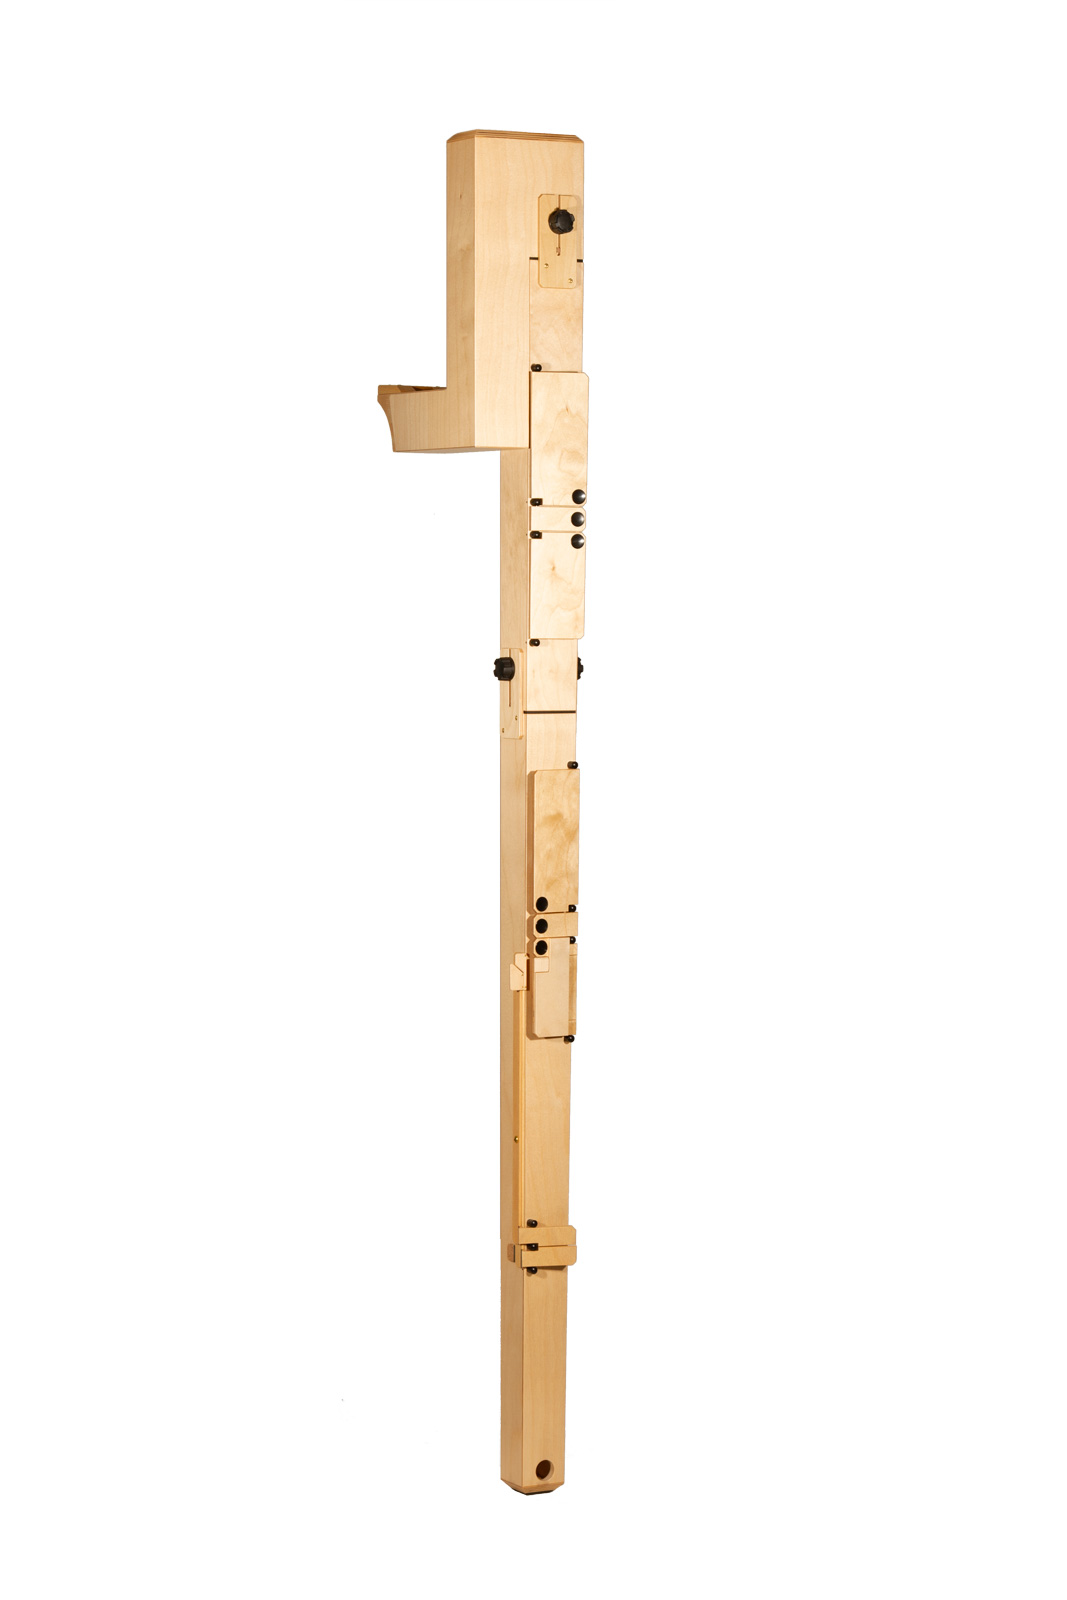 Paetzold by Kunath, Sub great bass in C, "Master", "Direct Blow", 442 Hz, natural finish, birch plywoo